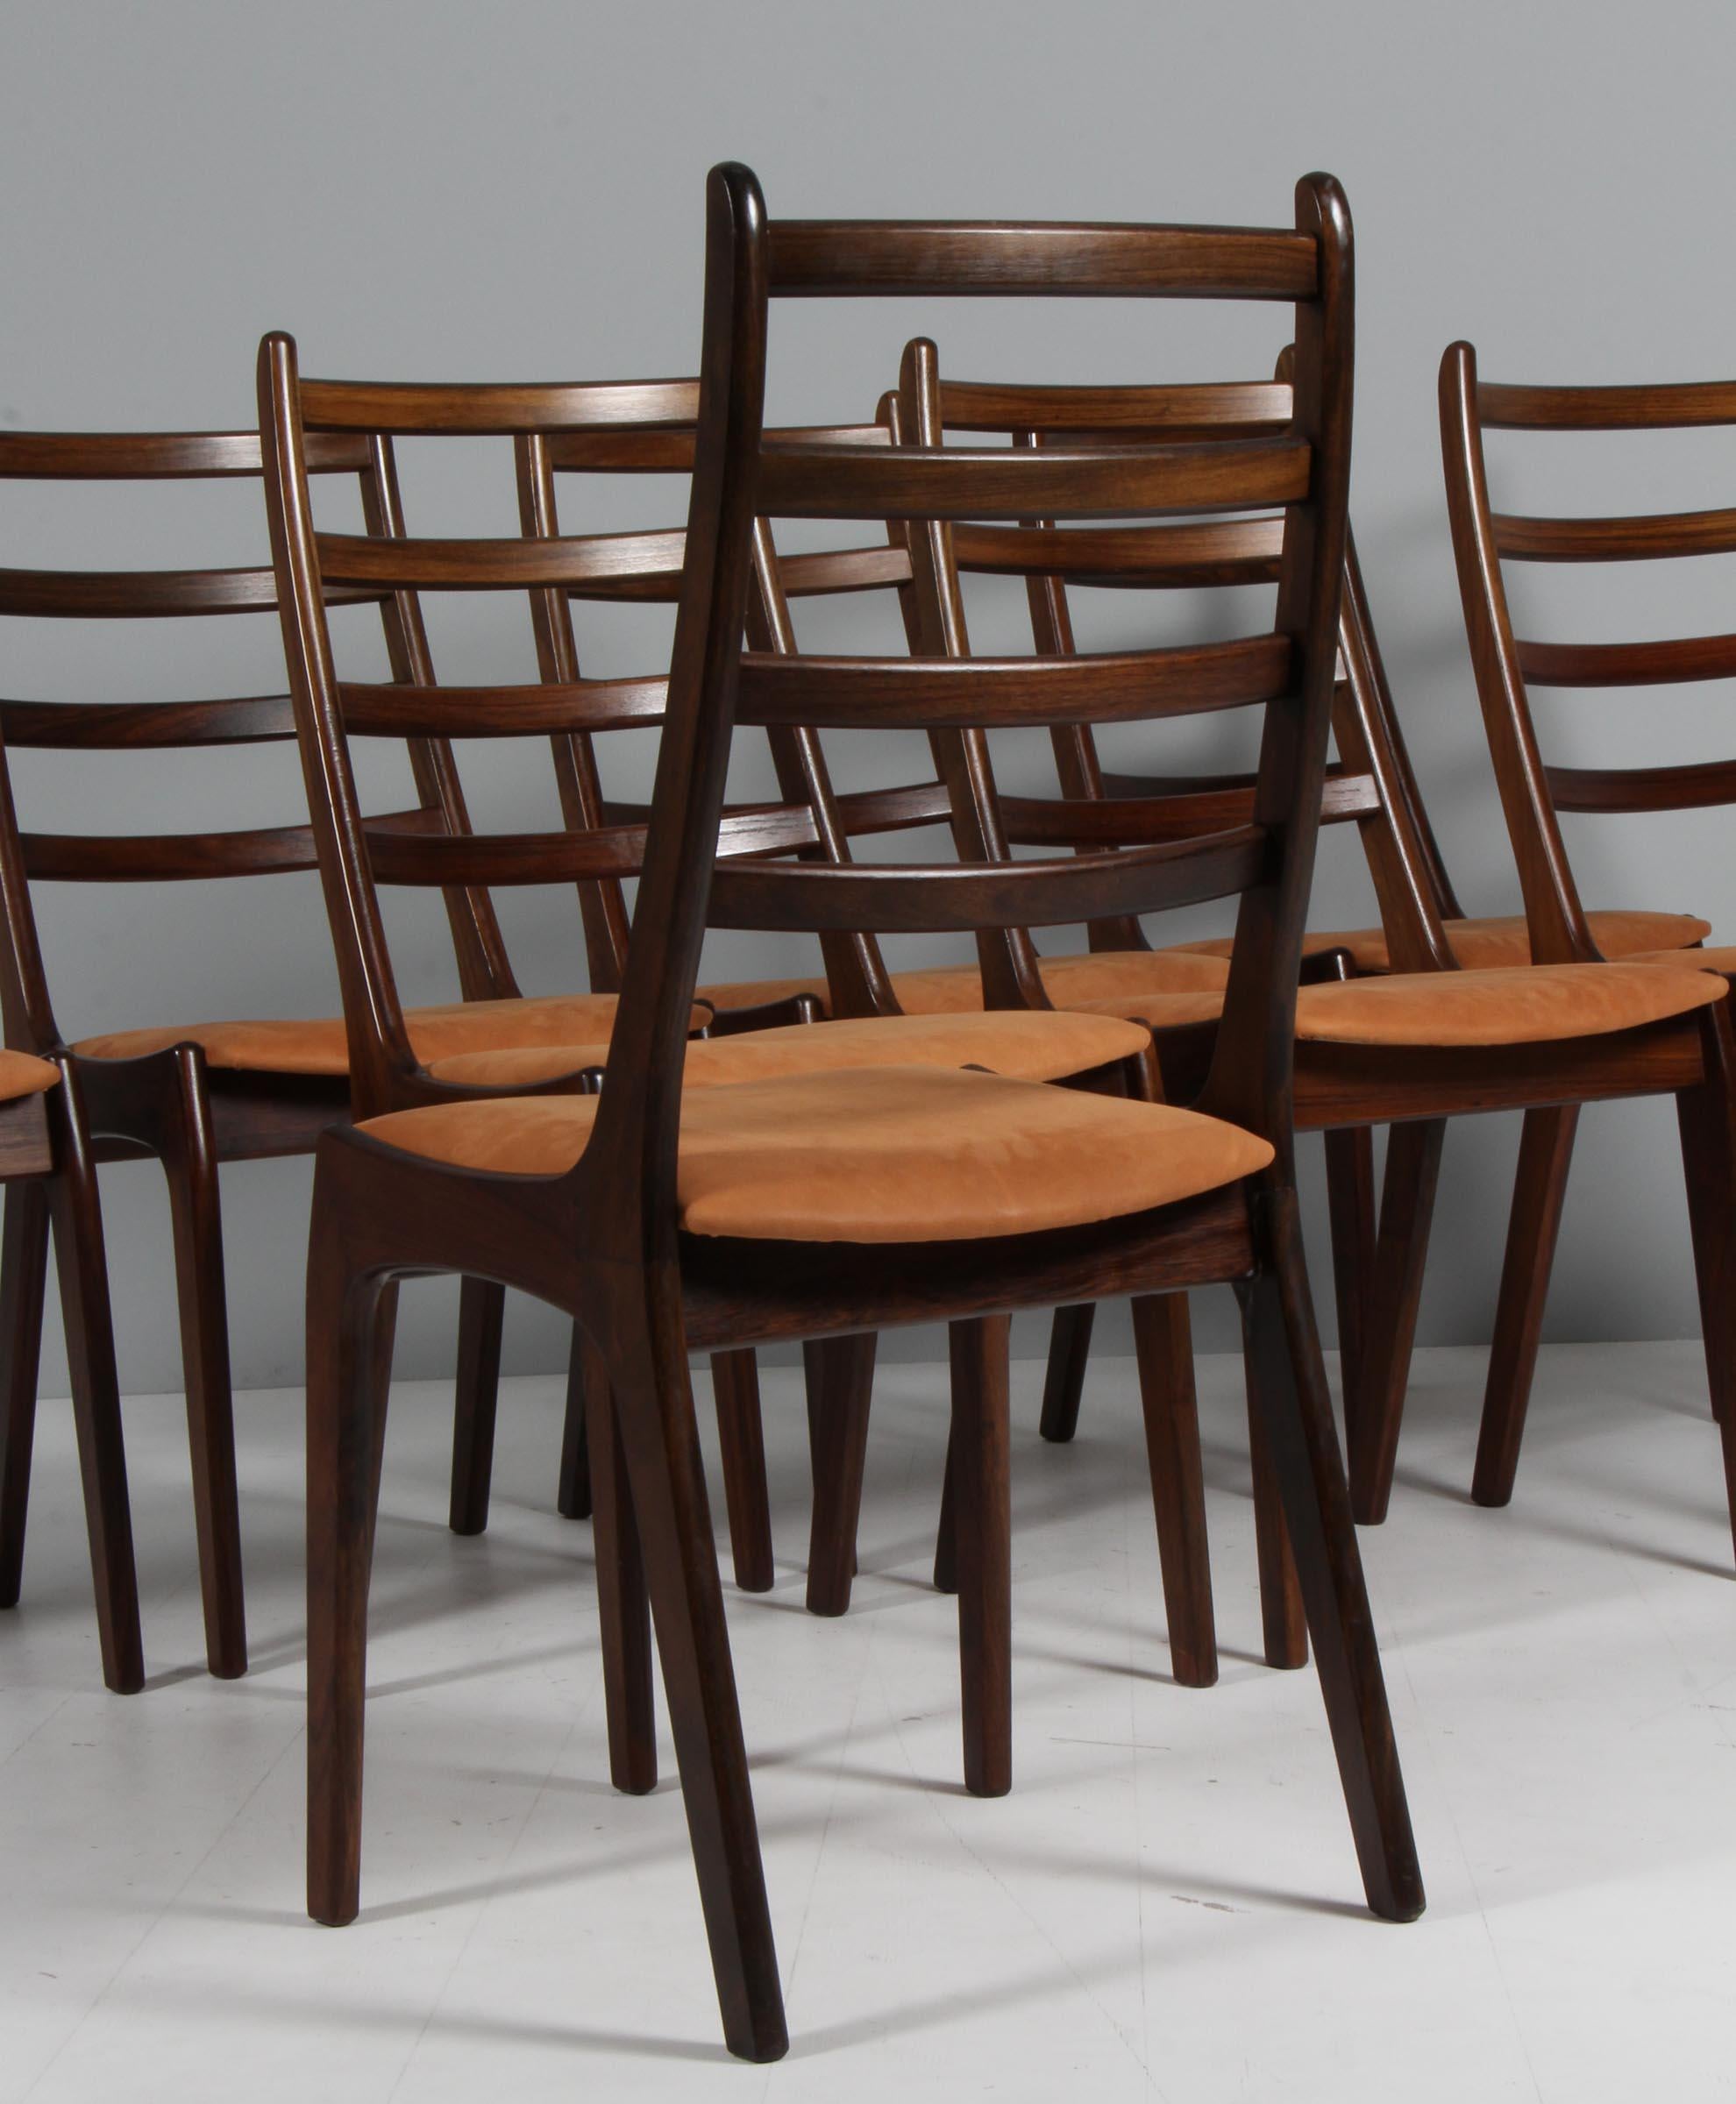 Leather Korup stolefabrik set of eight dining chairs in rosewood, 1960s Denmark